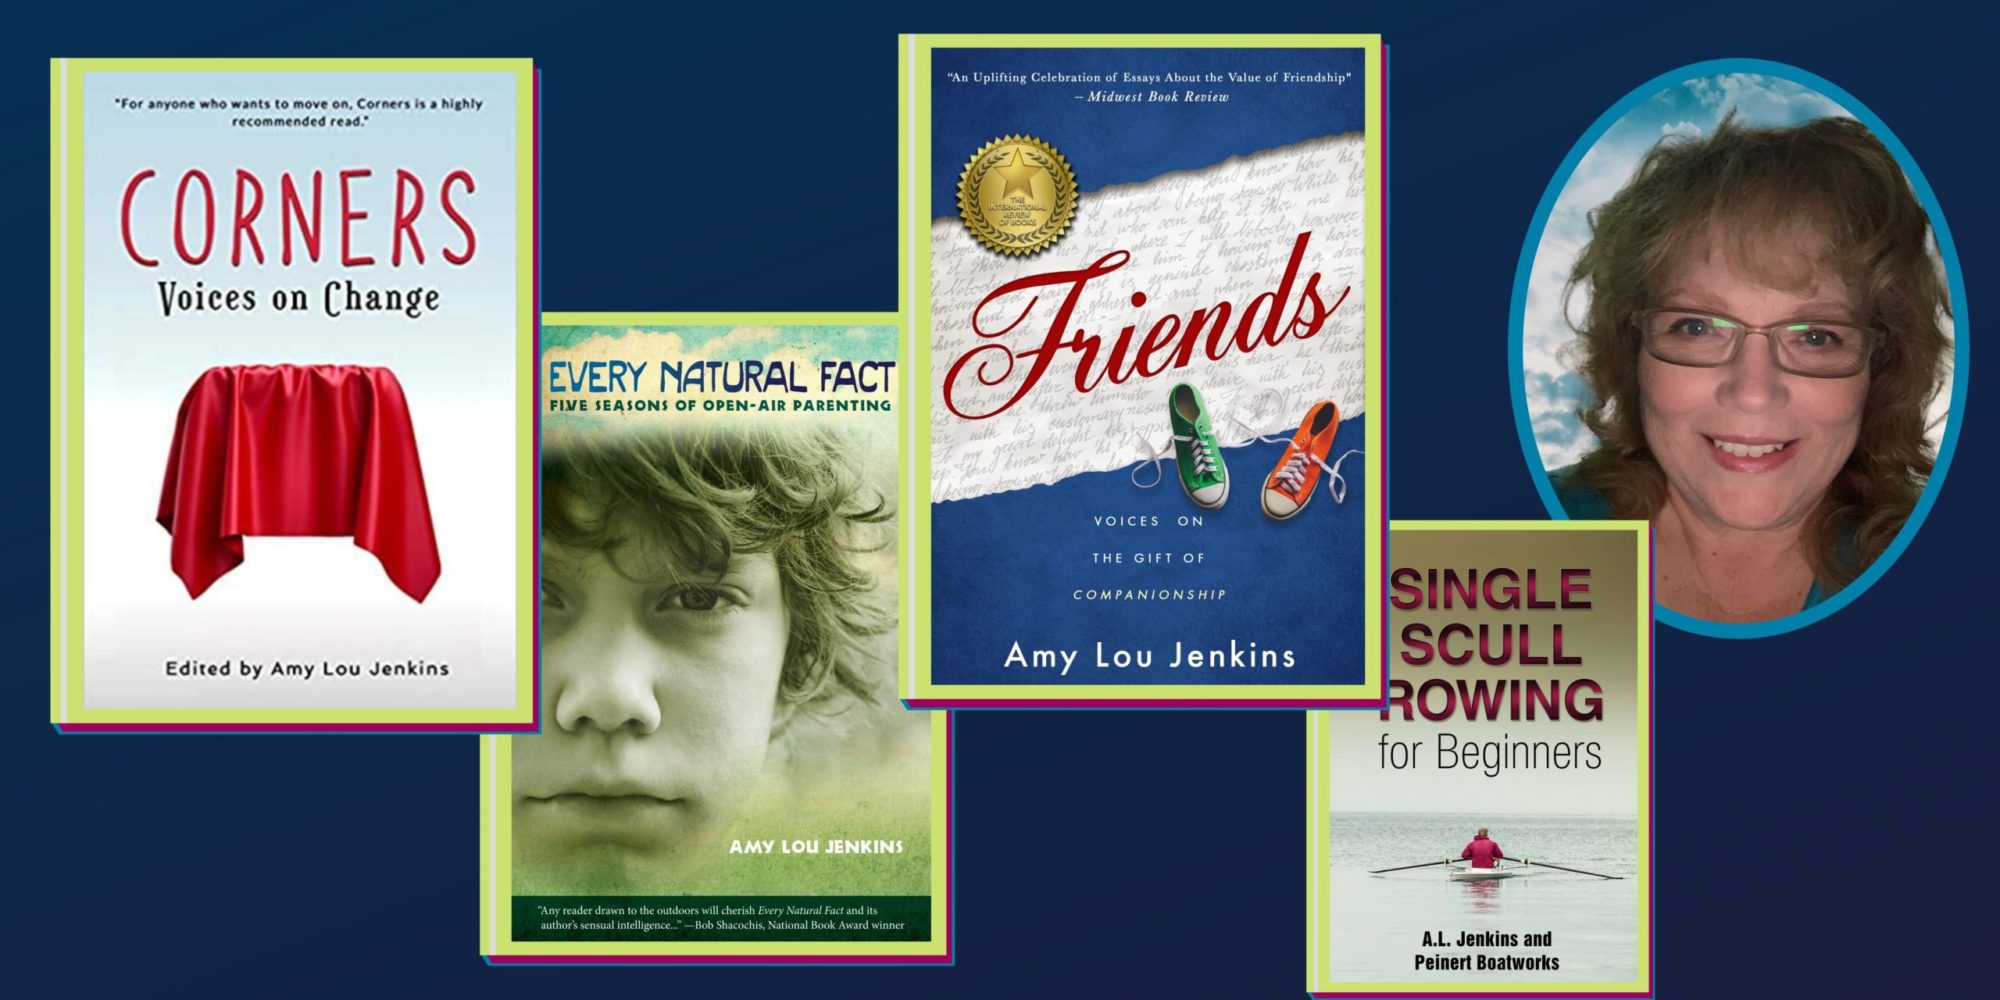 Books by Amy Lou Jenkins:  Every Natural Fact, Corners, Friends, Single Scull Rowing